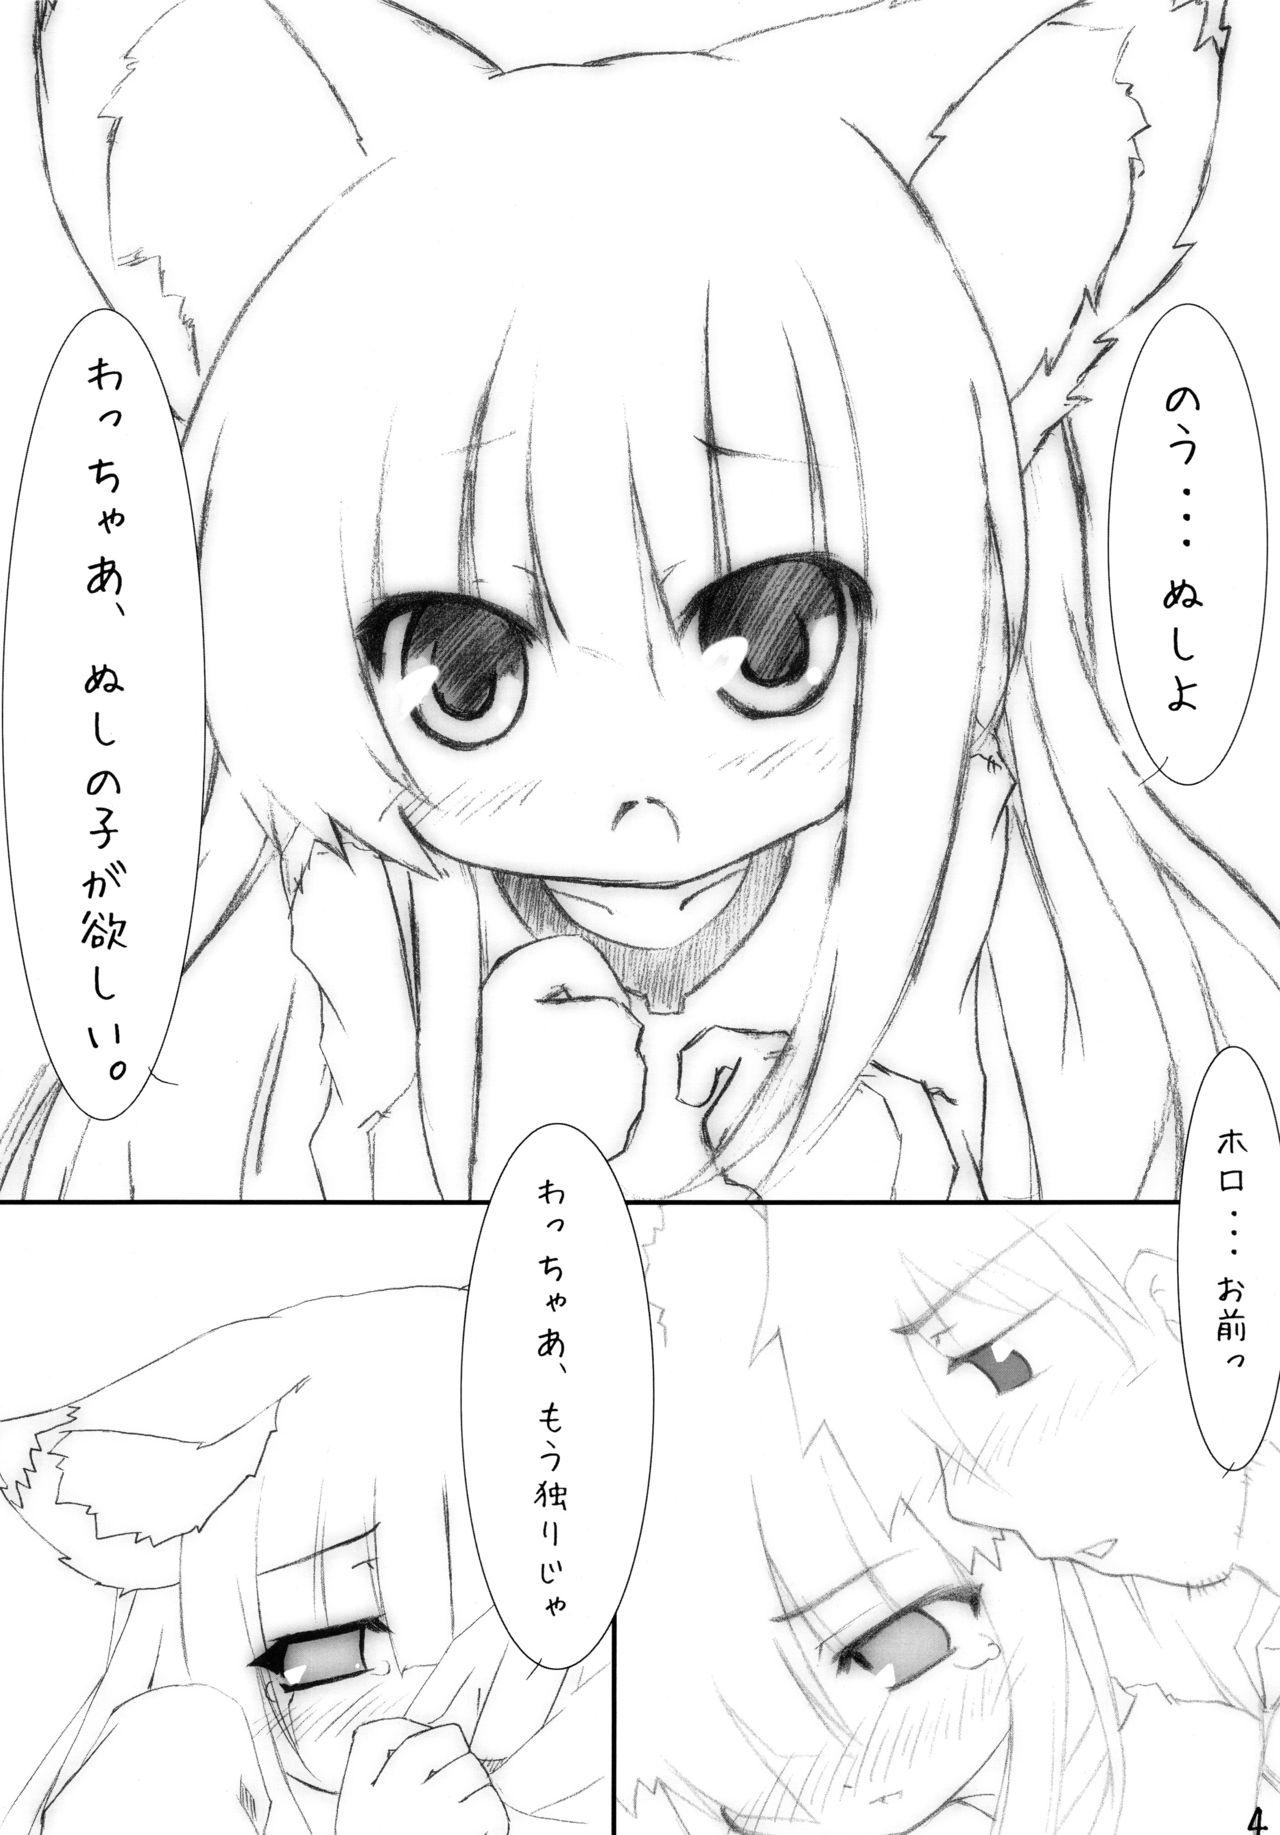 Milk Puni Wacchi - Spice and wolf Piercings - Page 4